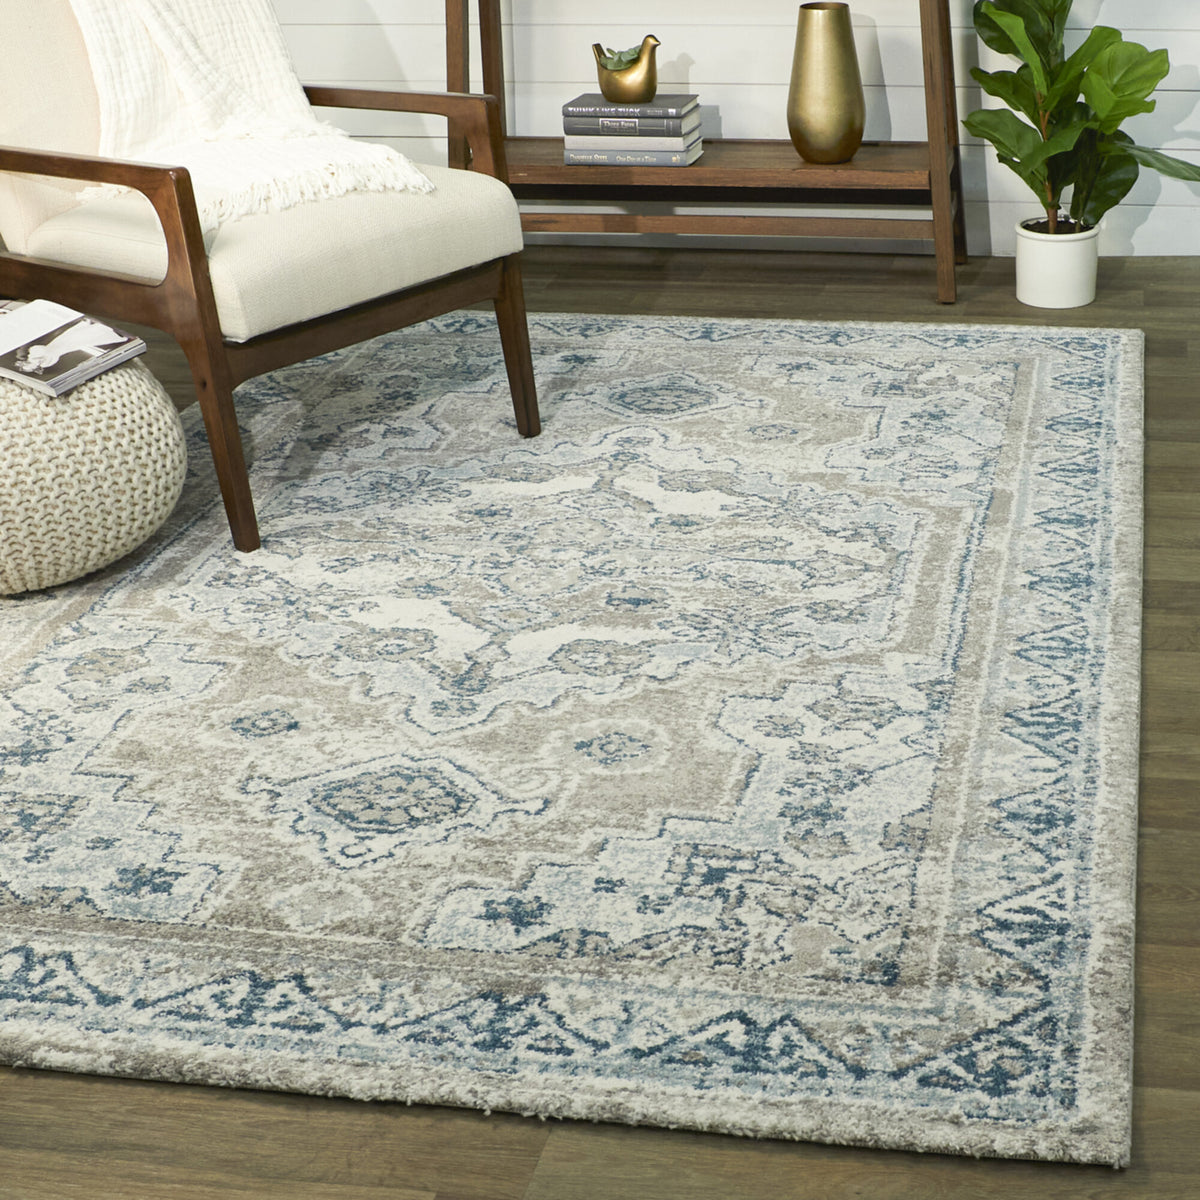 Lawson Traditional Persian Area Rug